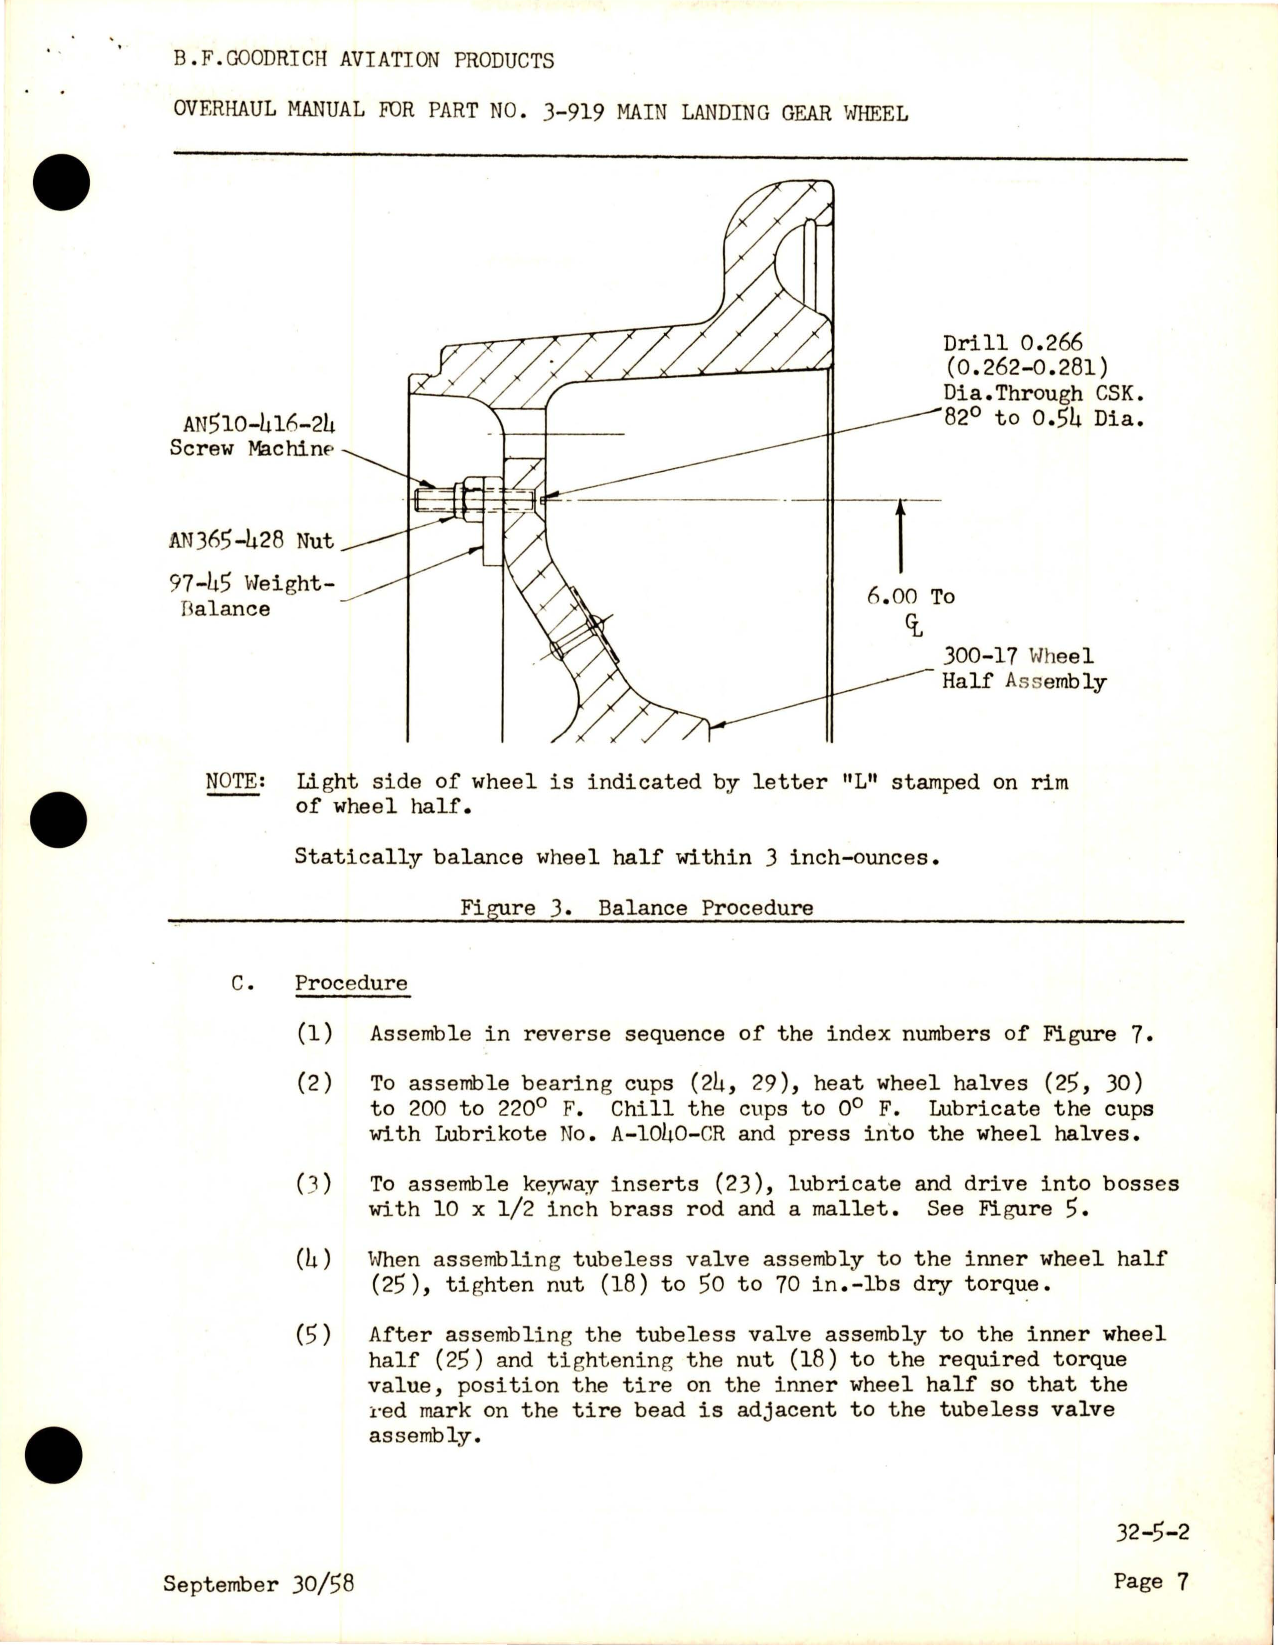 Sample page 7 from AirCorps Library document: Overhaul Manual for Main Landing Gear Wheel - Part 3-919 